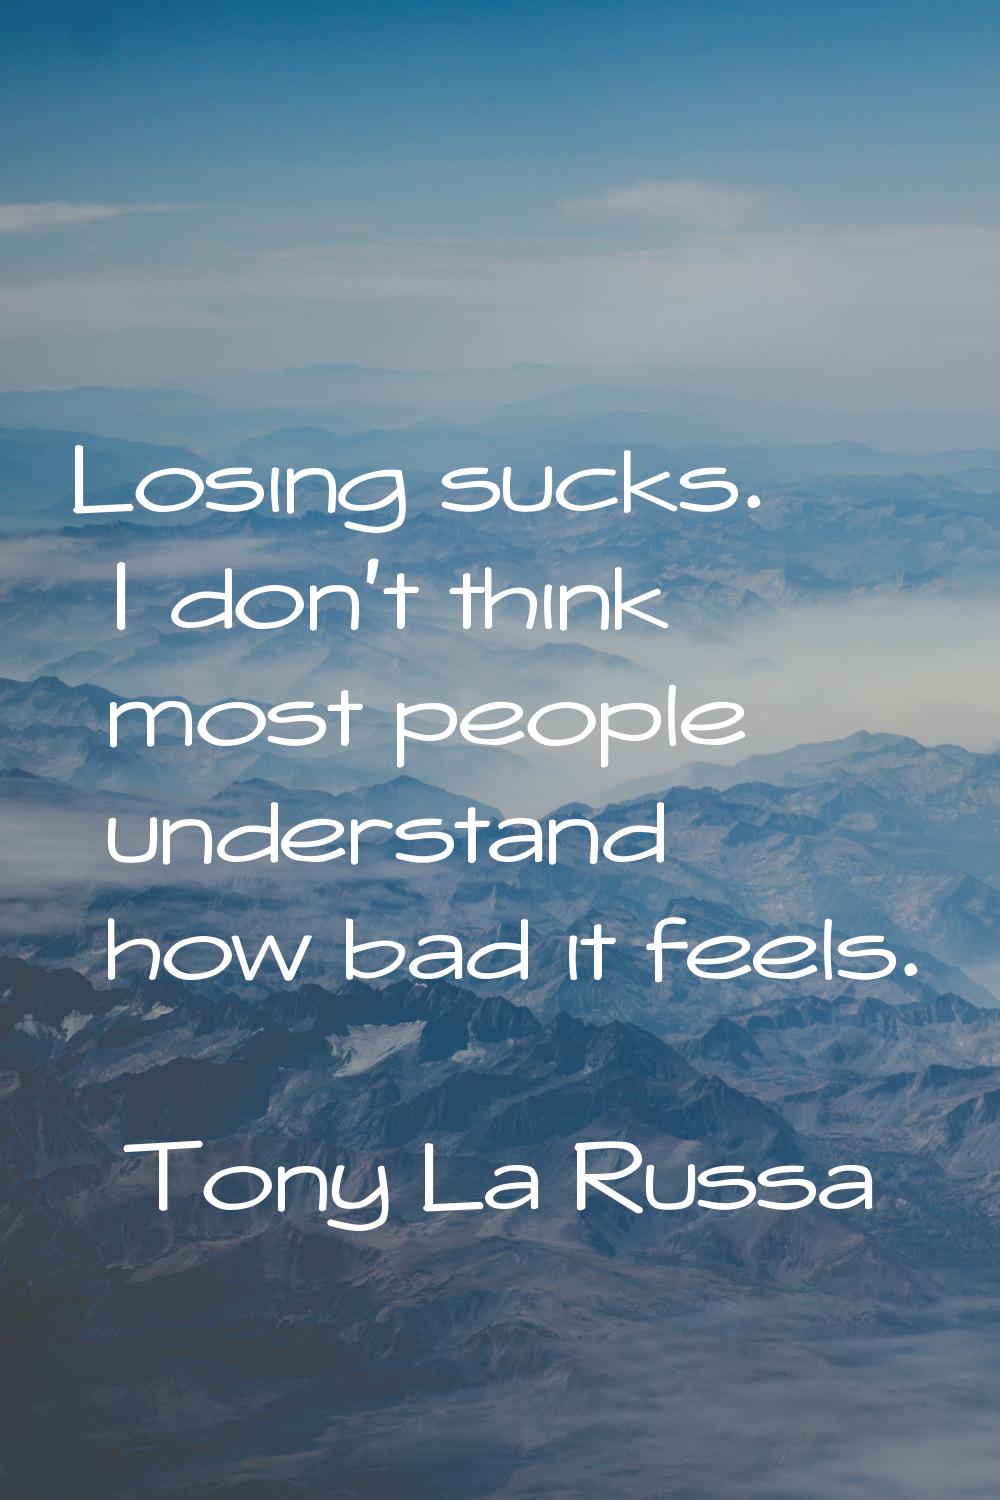 Losing sucks. I don't think most people understand how bad it feels.